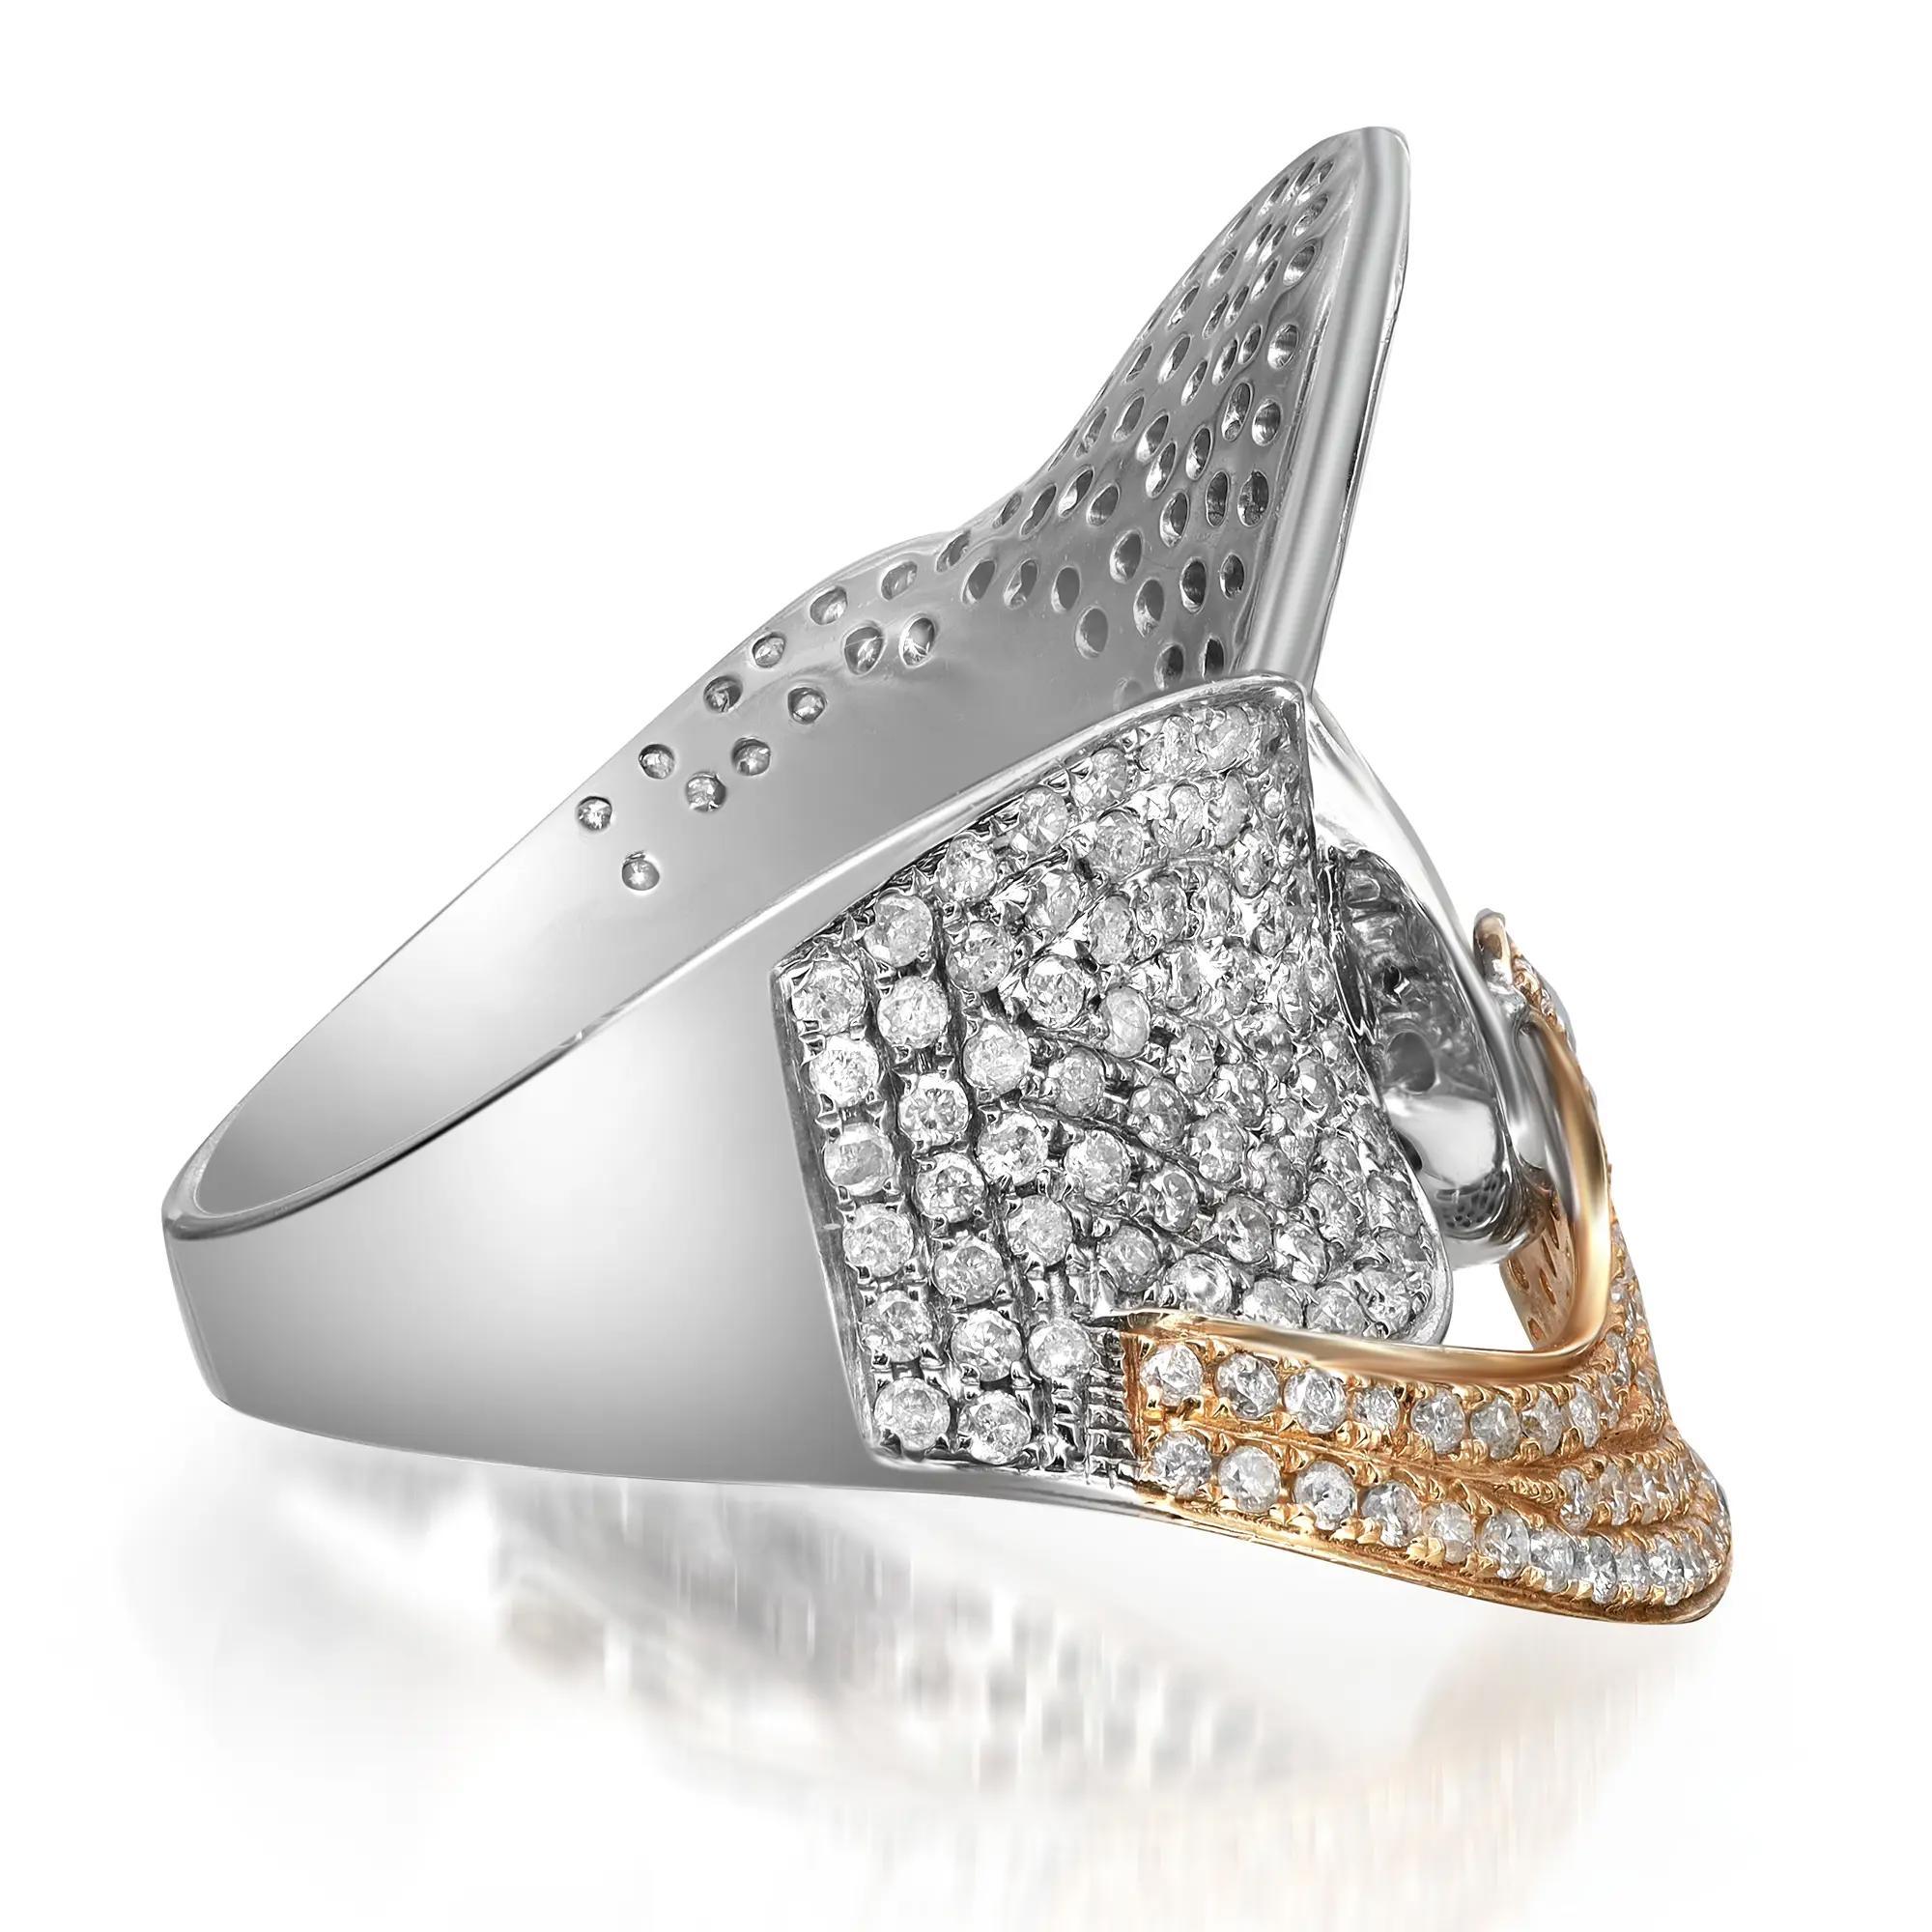 This stunning two tone cocktail ring comes with a flashy statement look. A must have in your jewelry collection. The ring is crafted in 14K white and yellow gold. Showcases pave set shimmering round cut diamonds weighing 2.16 carats. Diamond color I